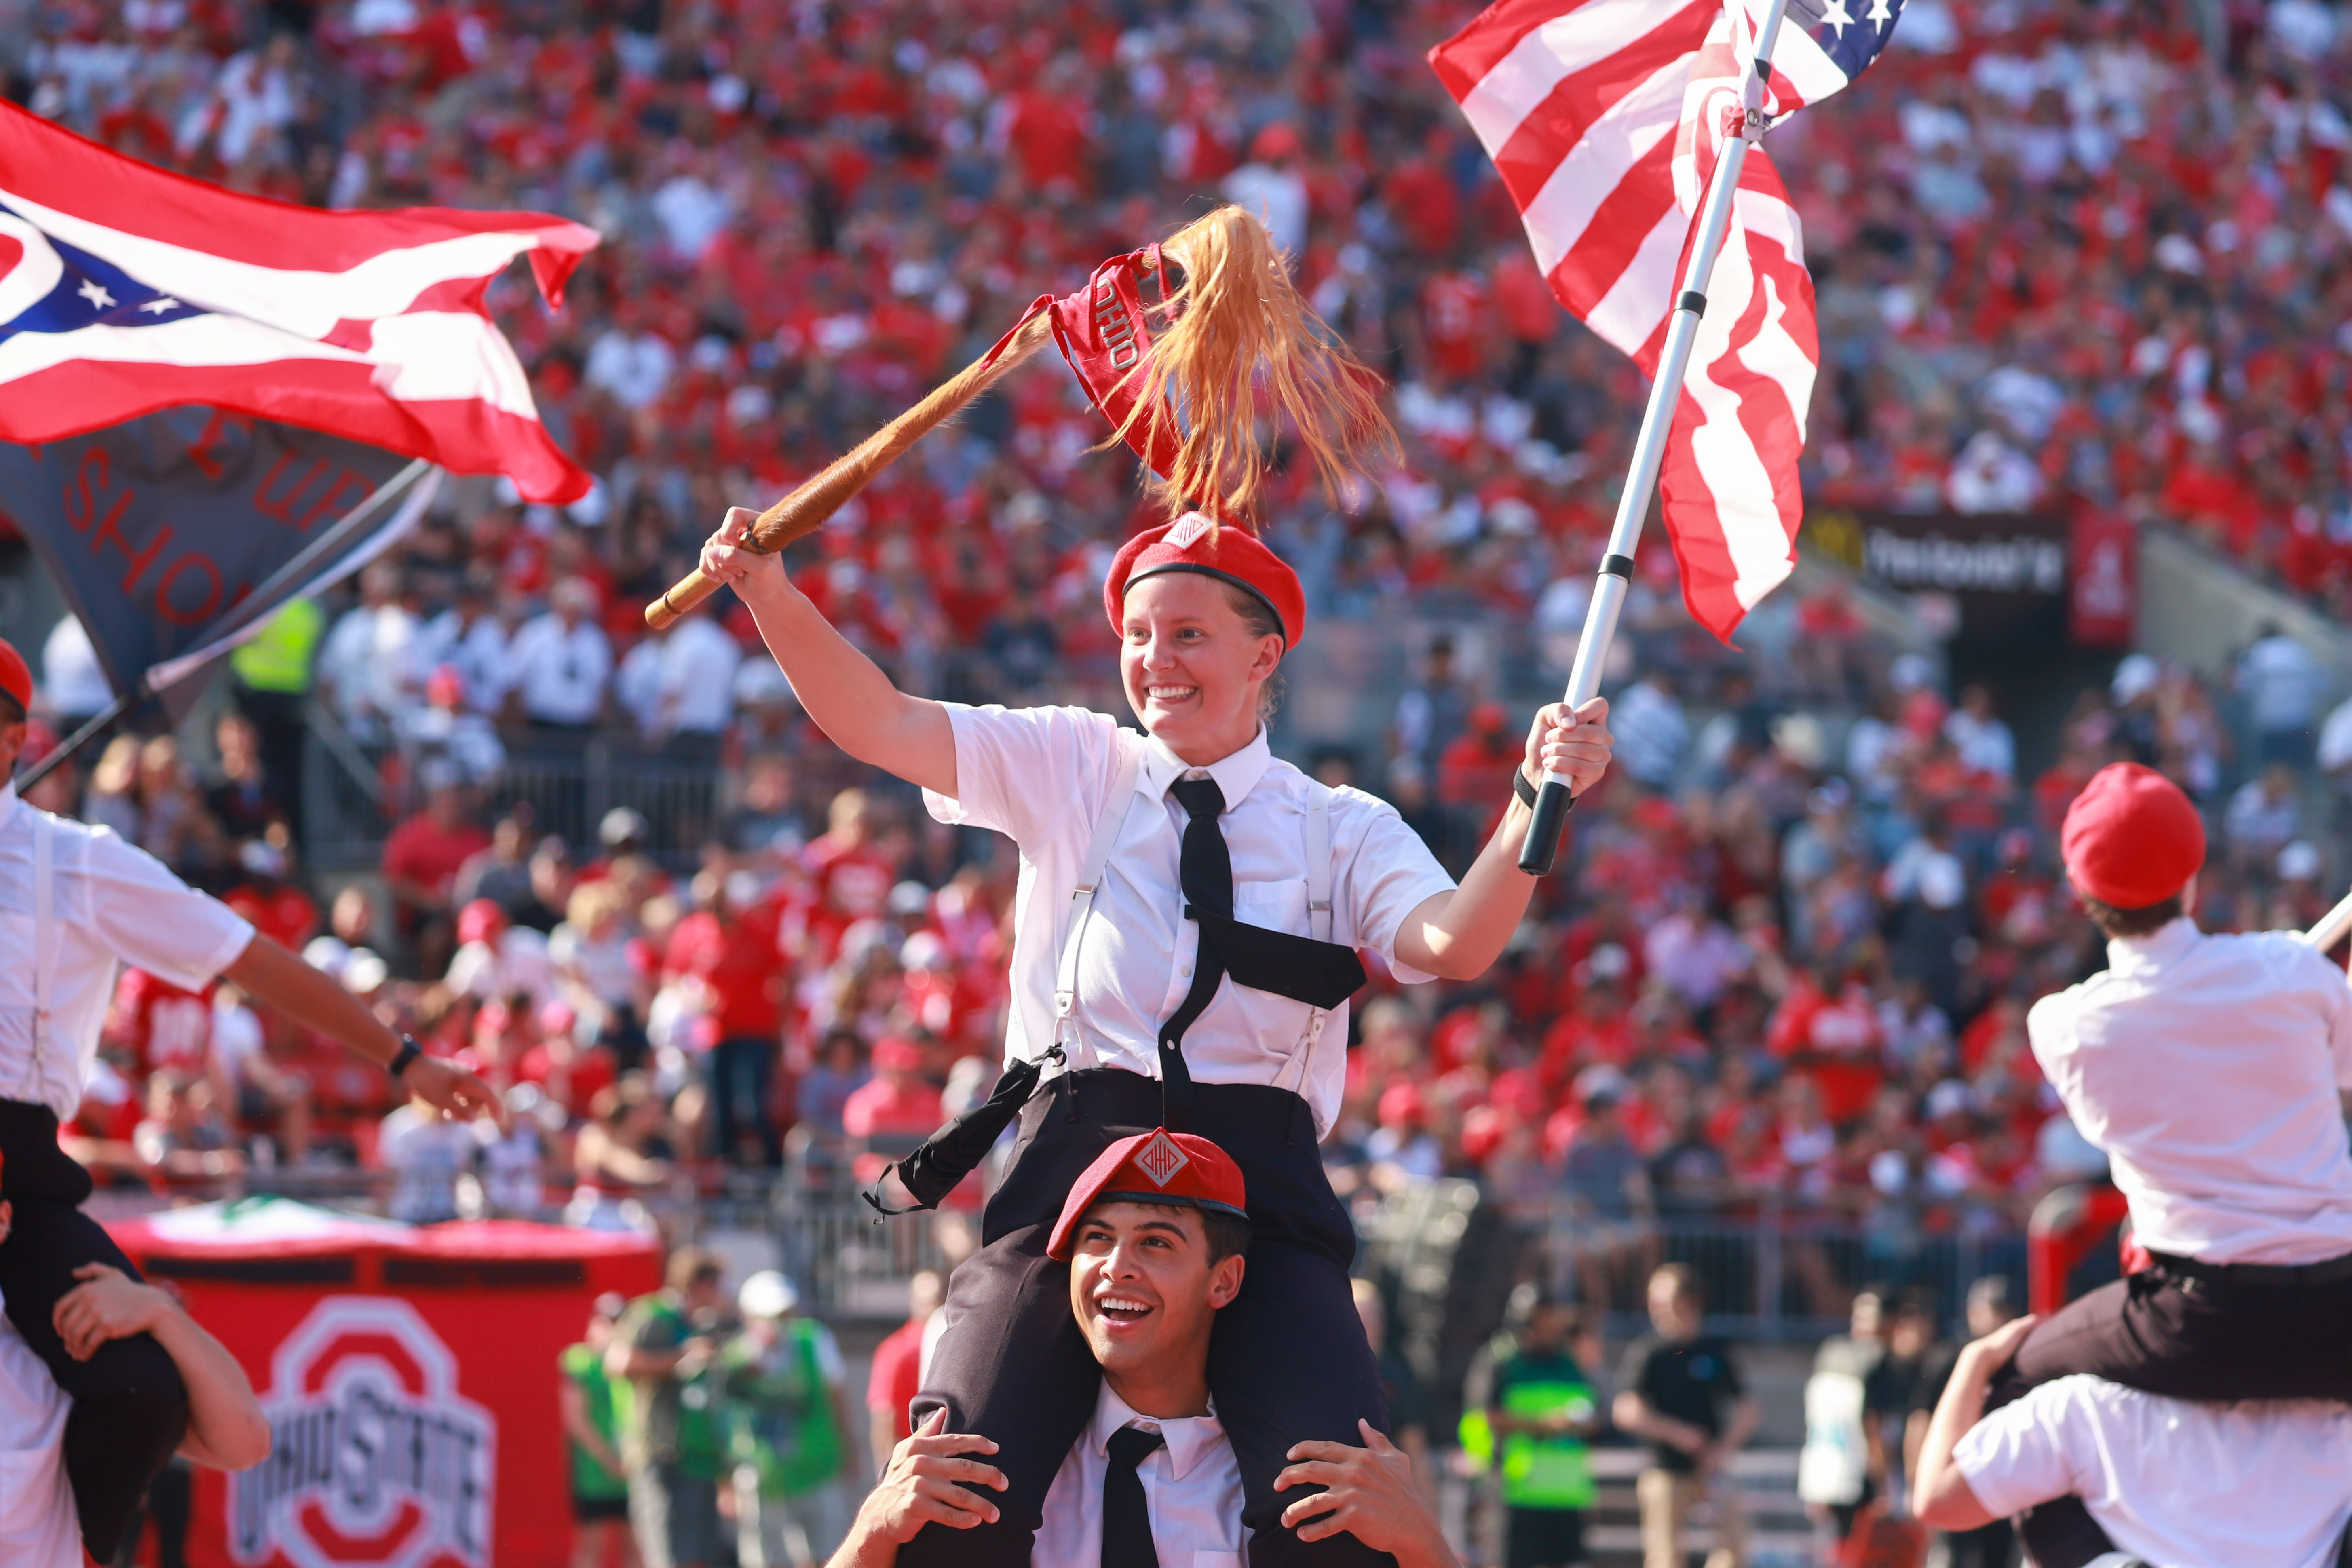 Gameday do’s and don’ts to celebrate 100 years at Ohio Stadium